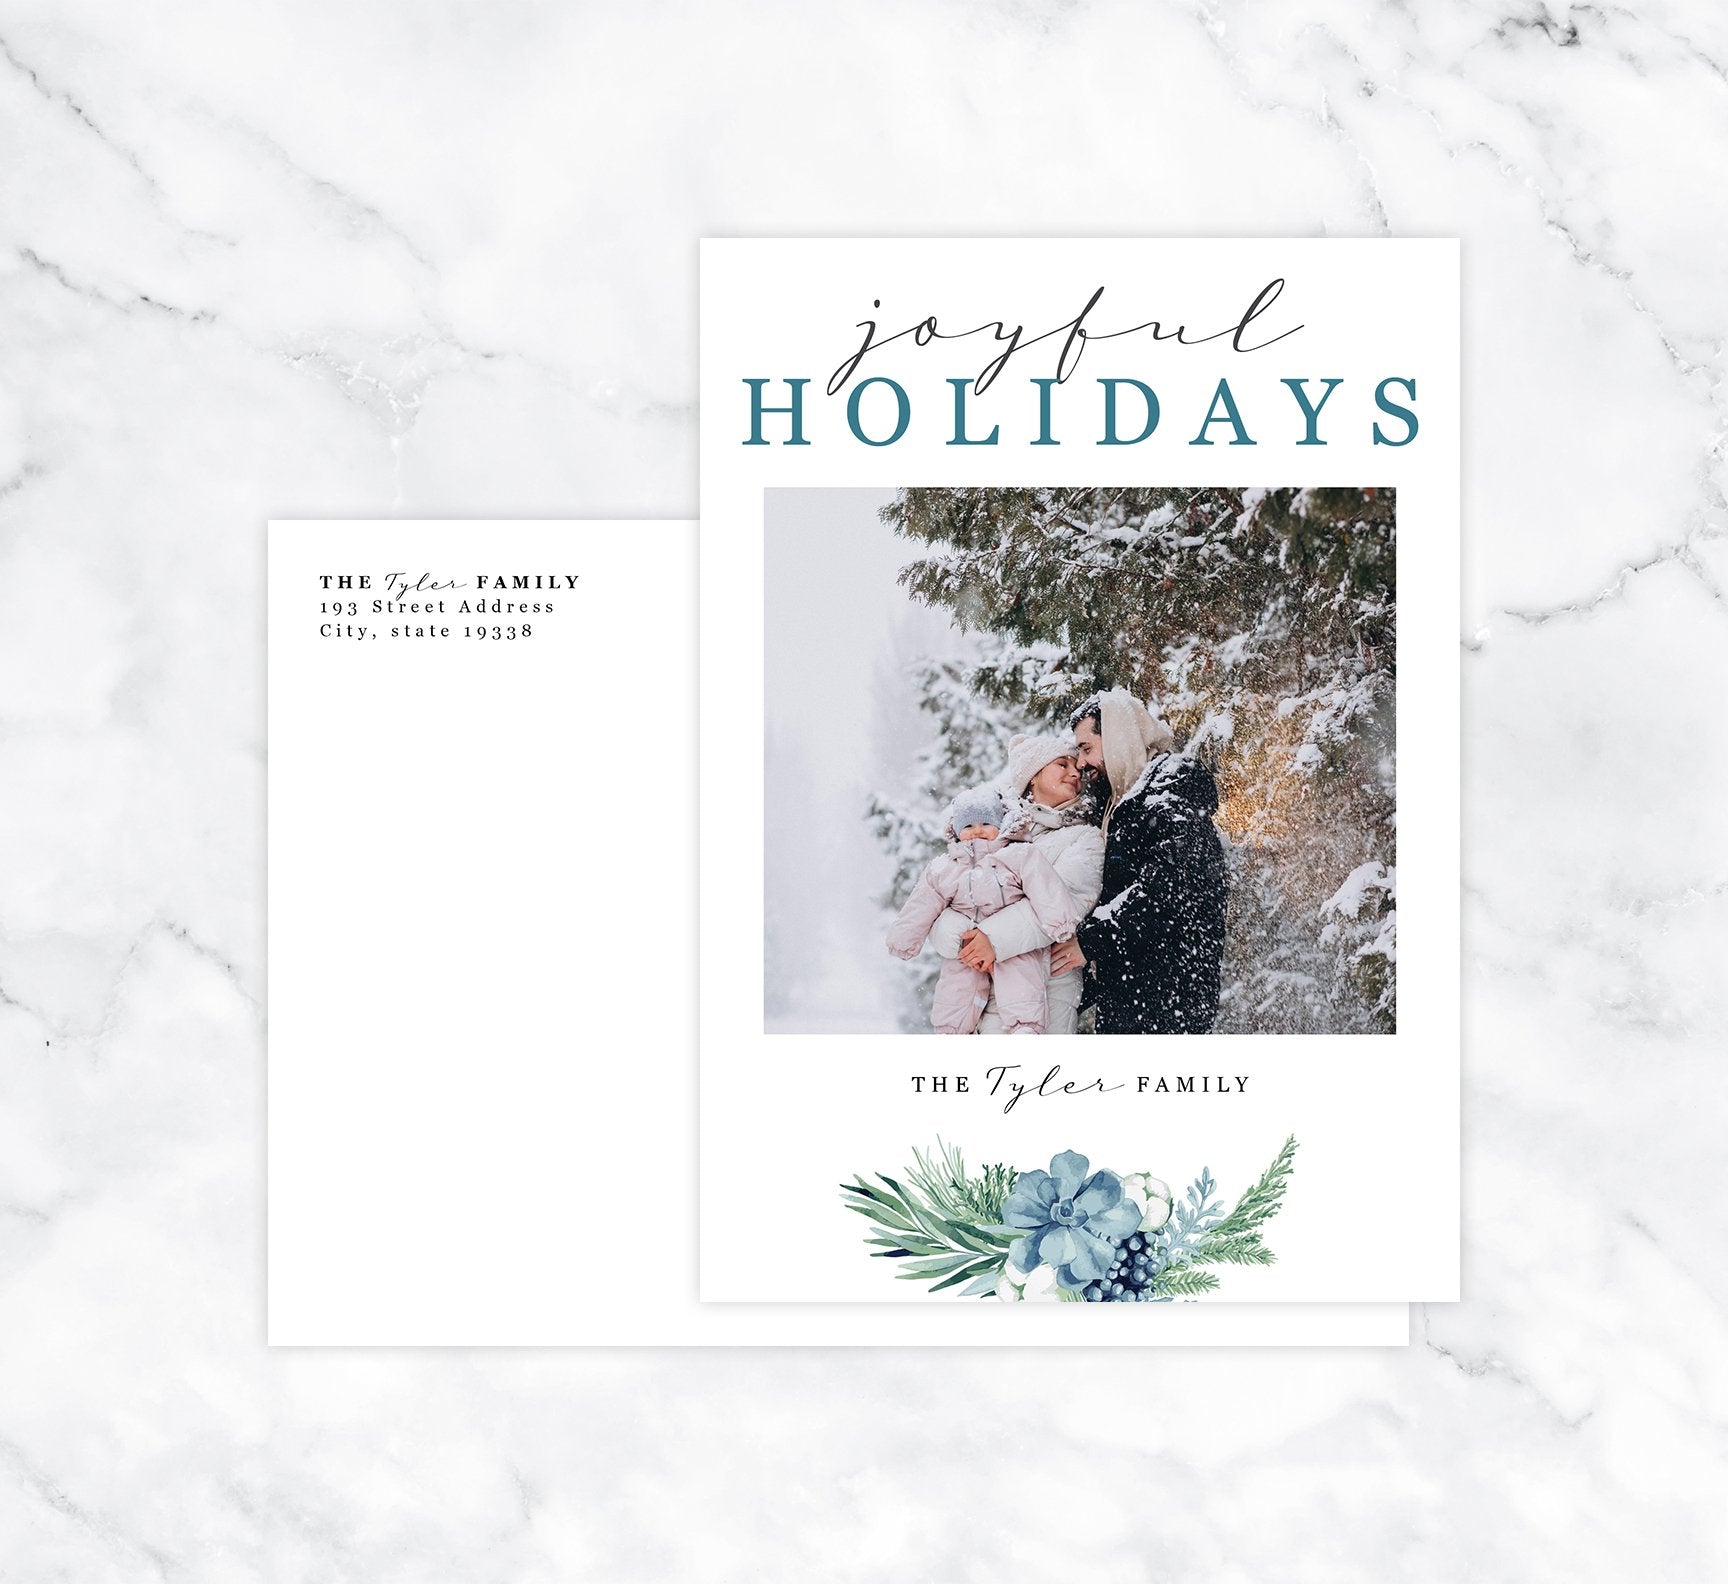 Blue Botanical Holiday Card Mockup; Holiday card with envelope and return address printed on it. 